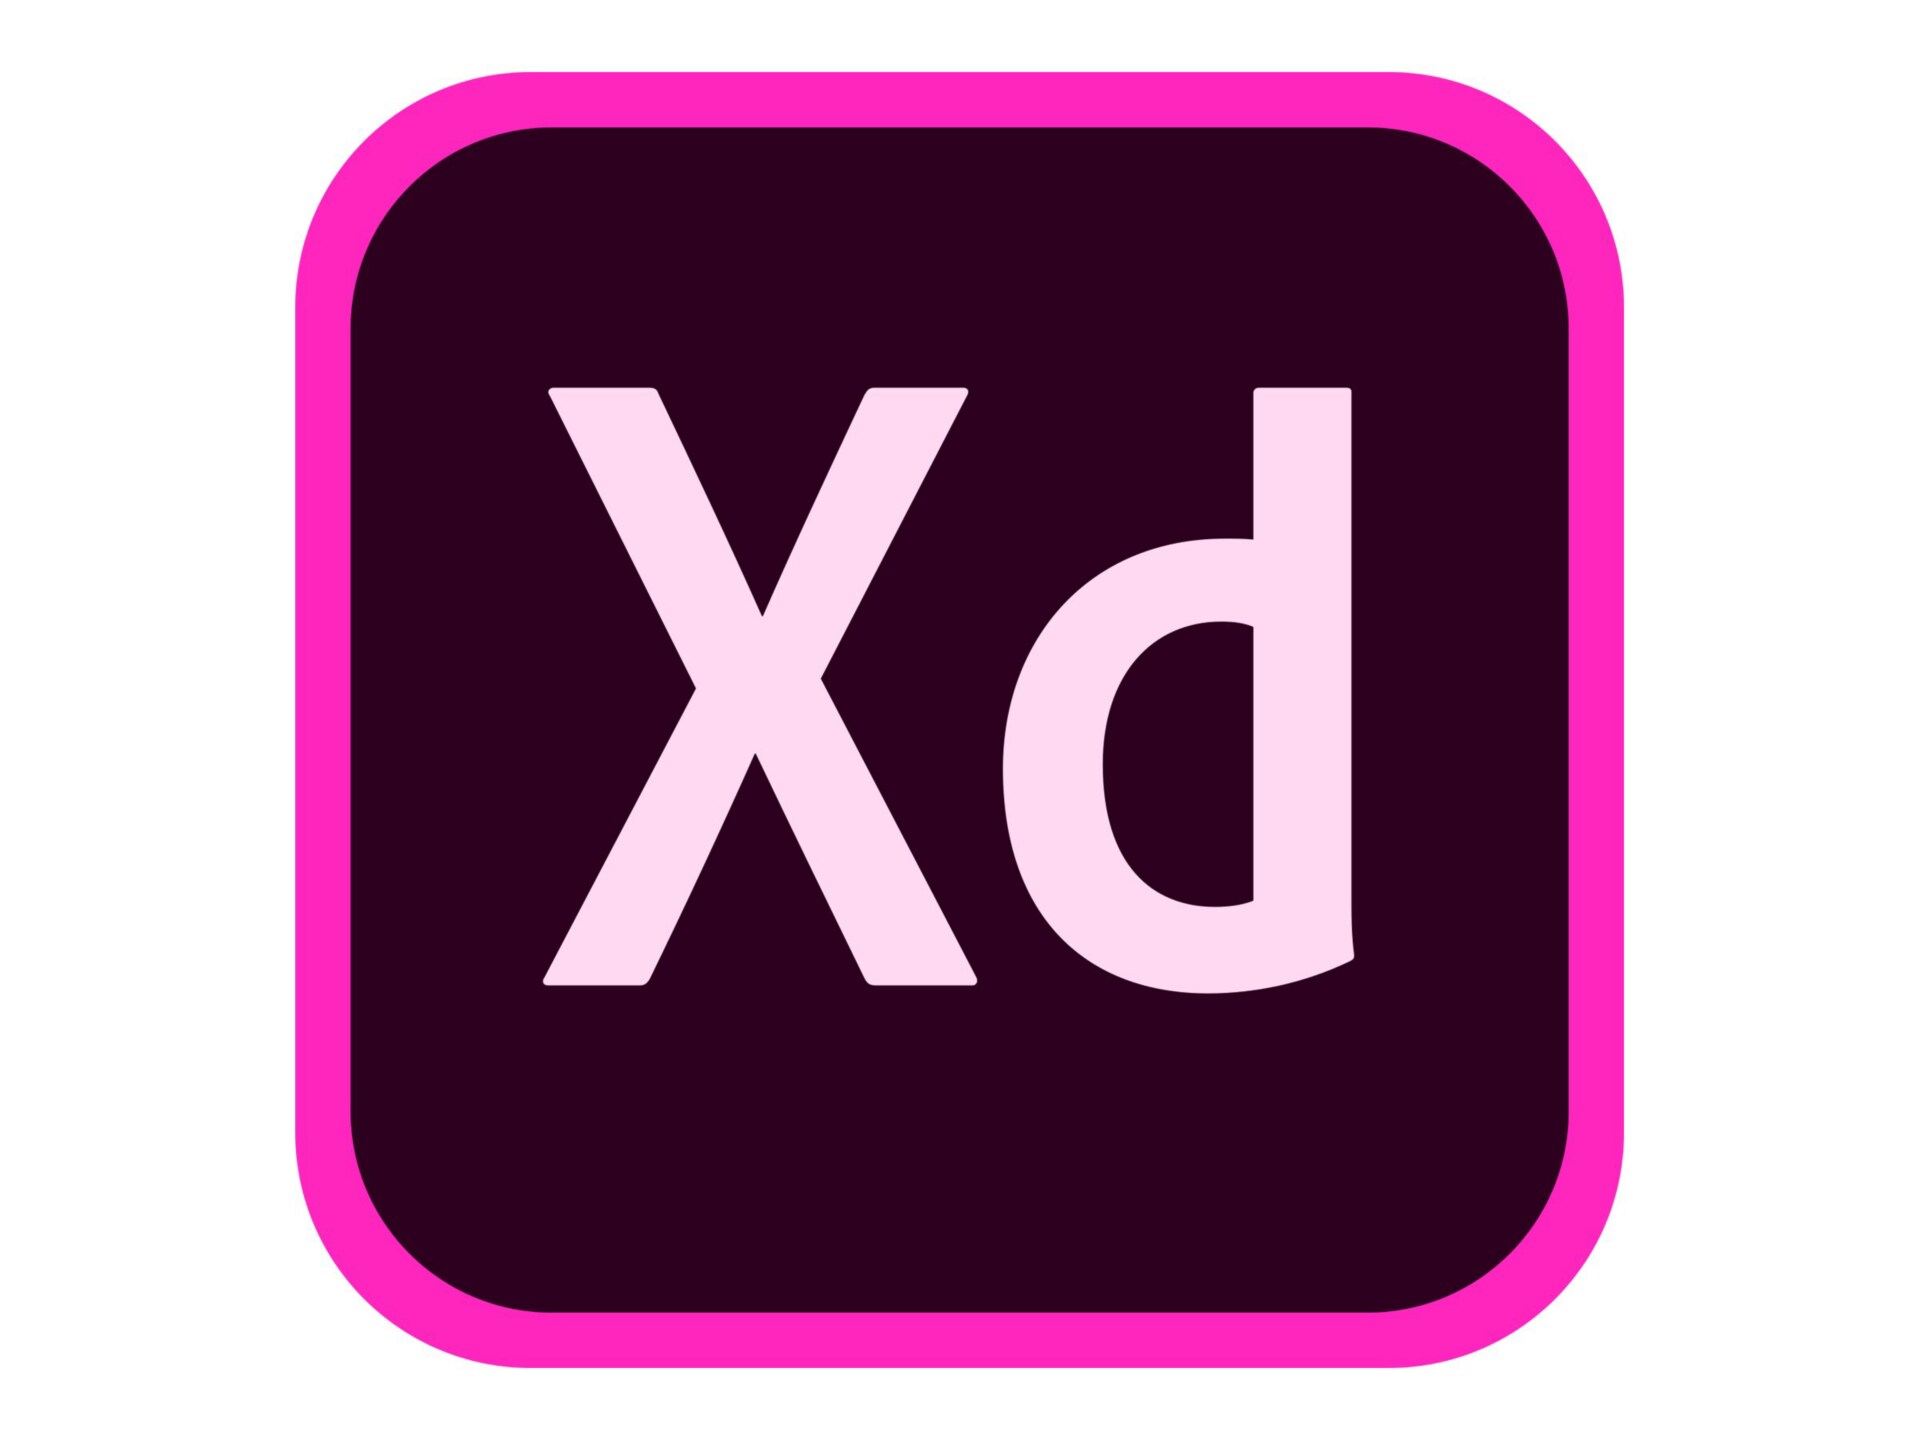 Adobe XD CC for Teams - Subscription New (18 months) - 1 user